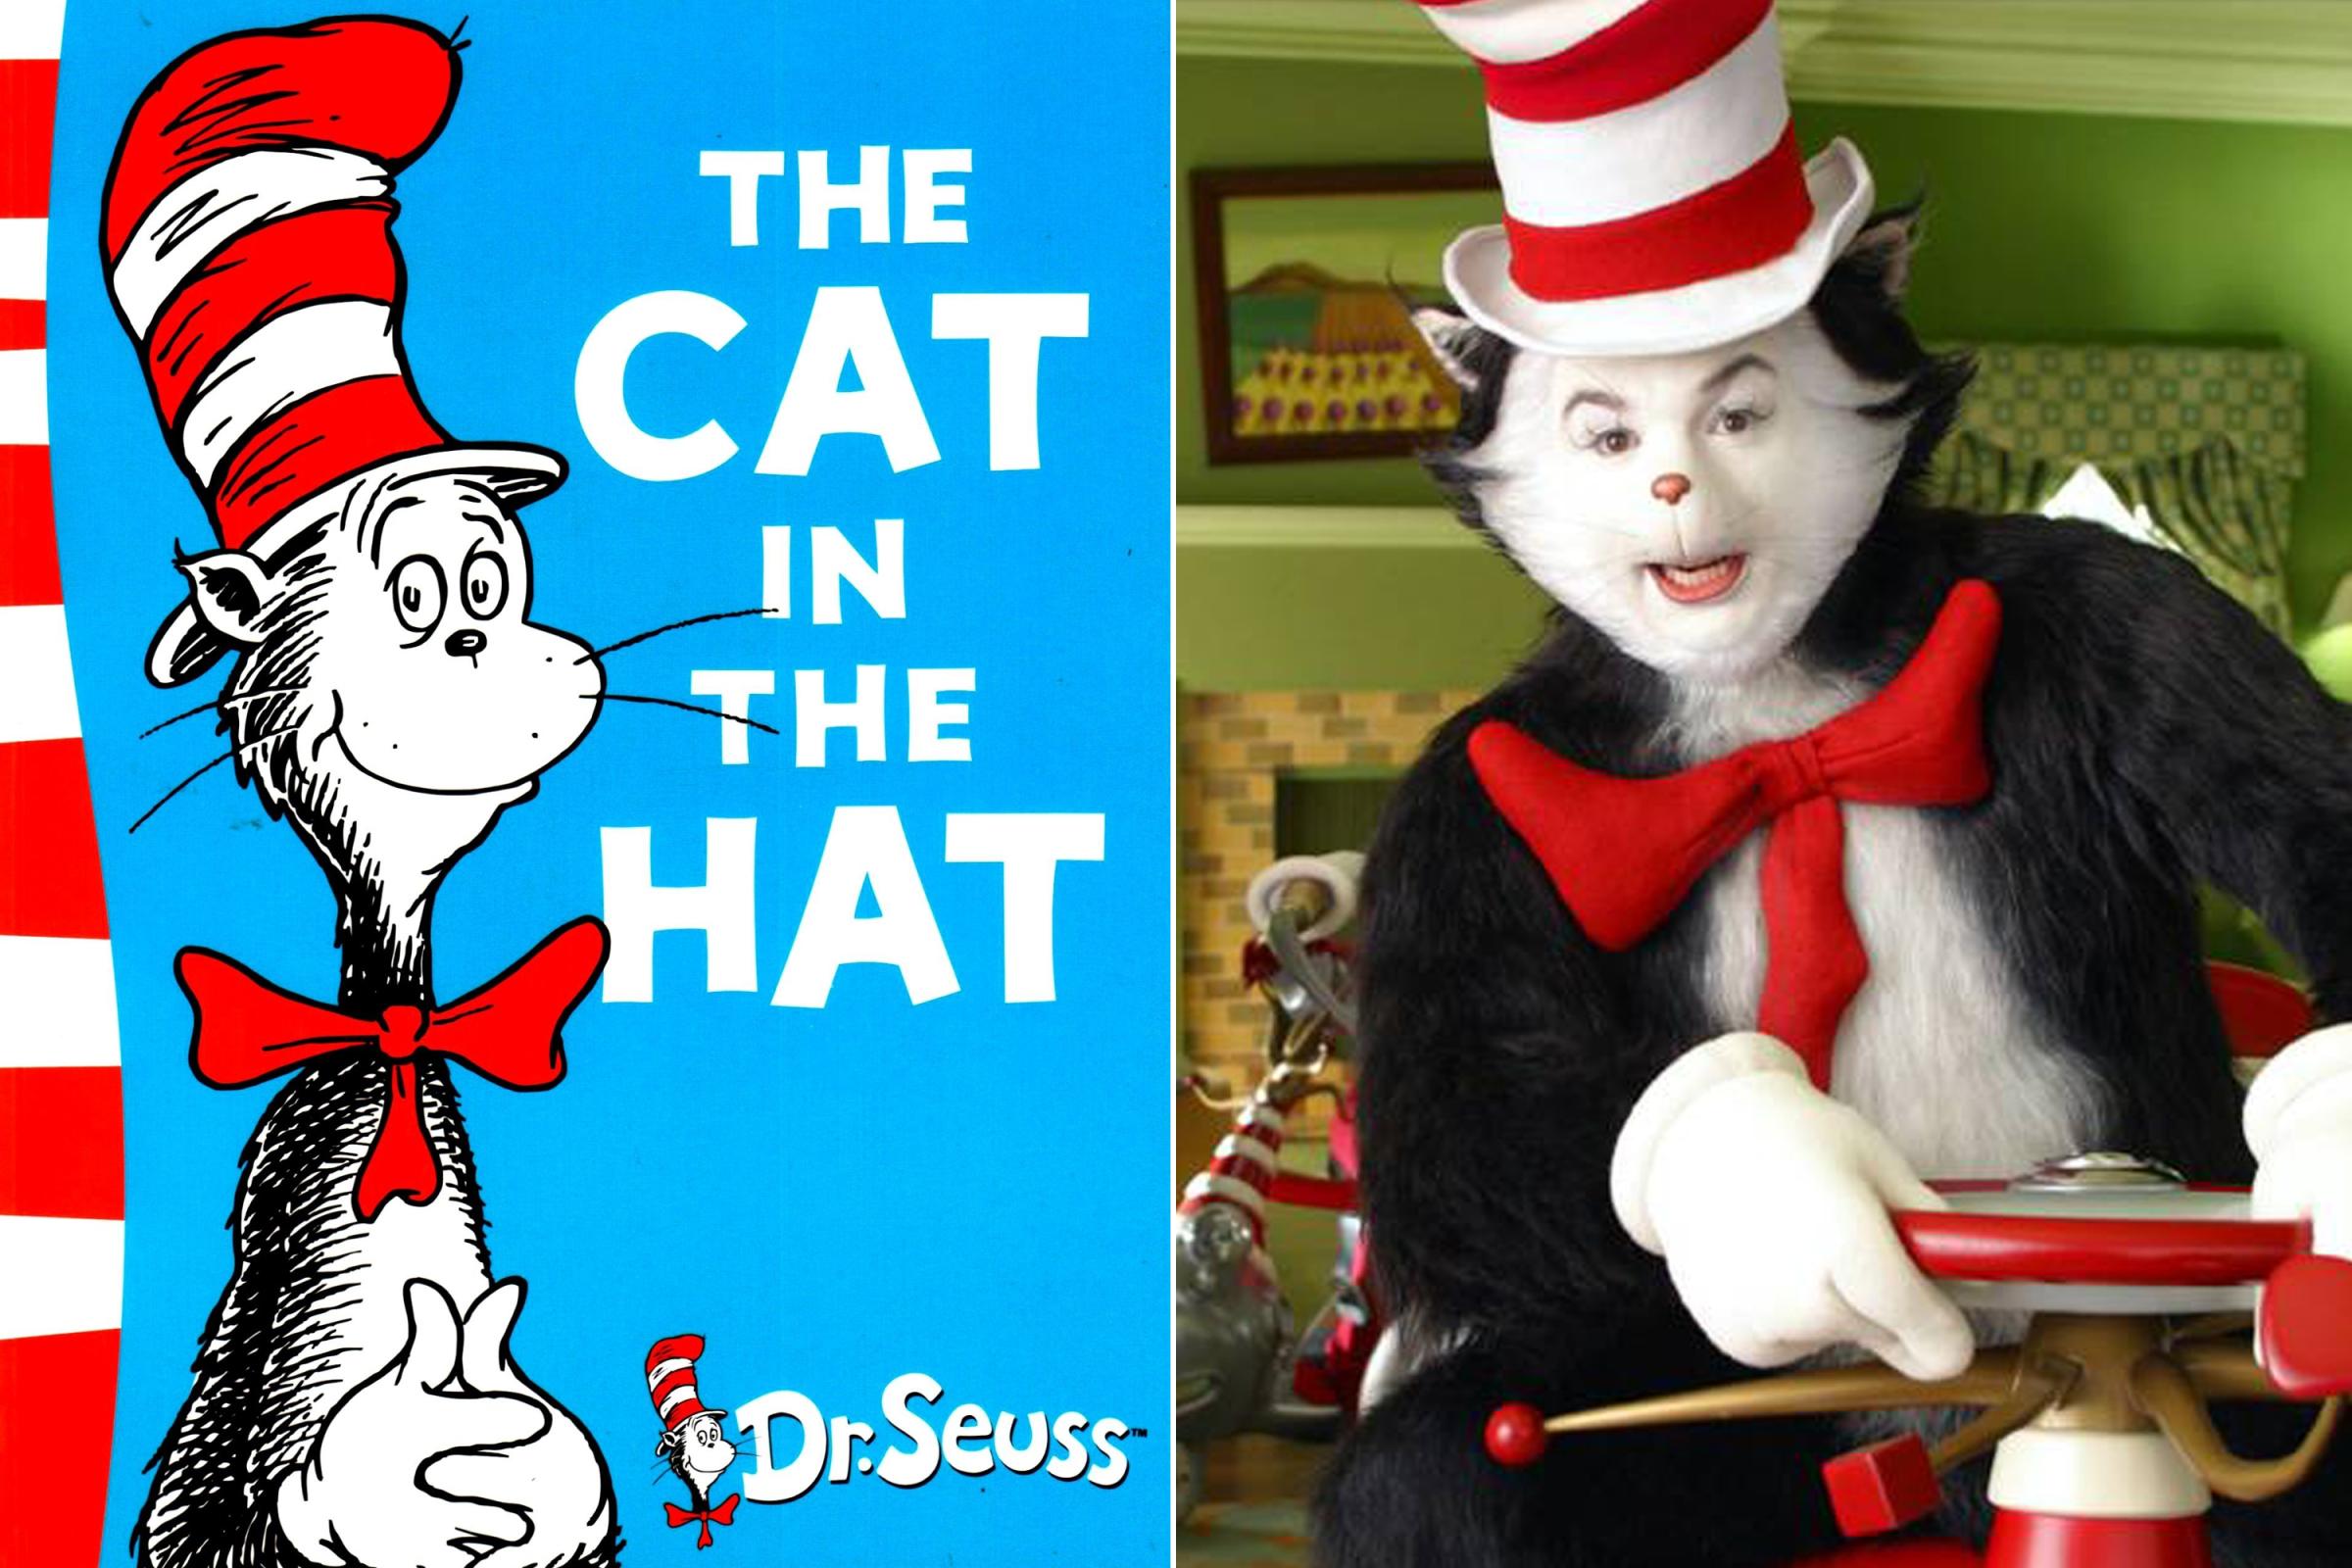 The Cat in the Hat, 1957 and The Cat in the Hat, 2003.